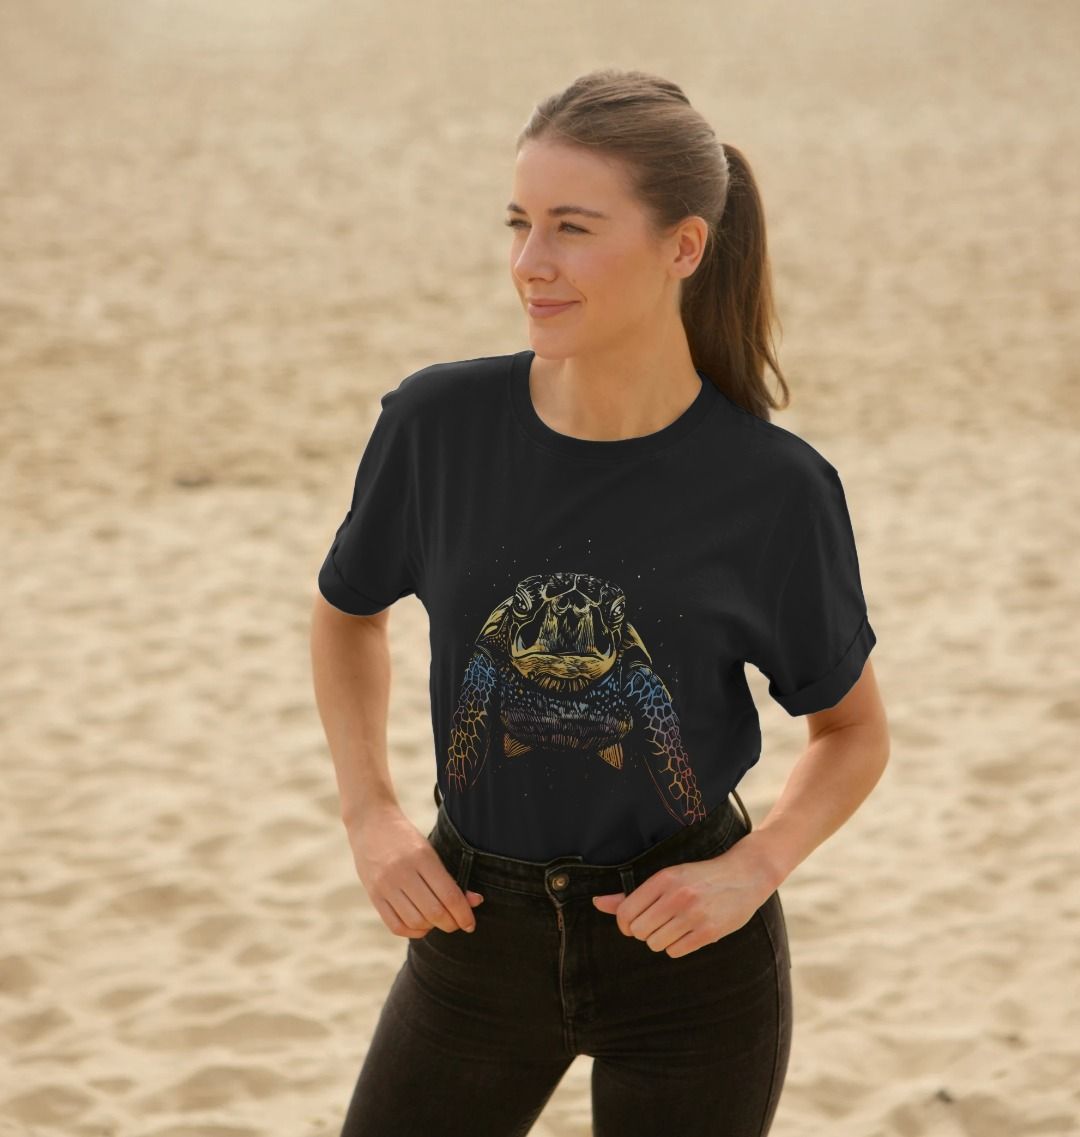 The Colour Turtle Women's Relaxed Fit Tee